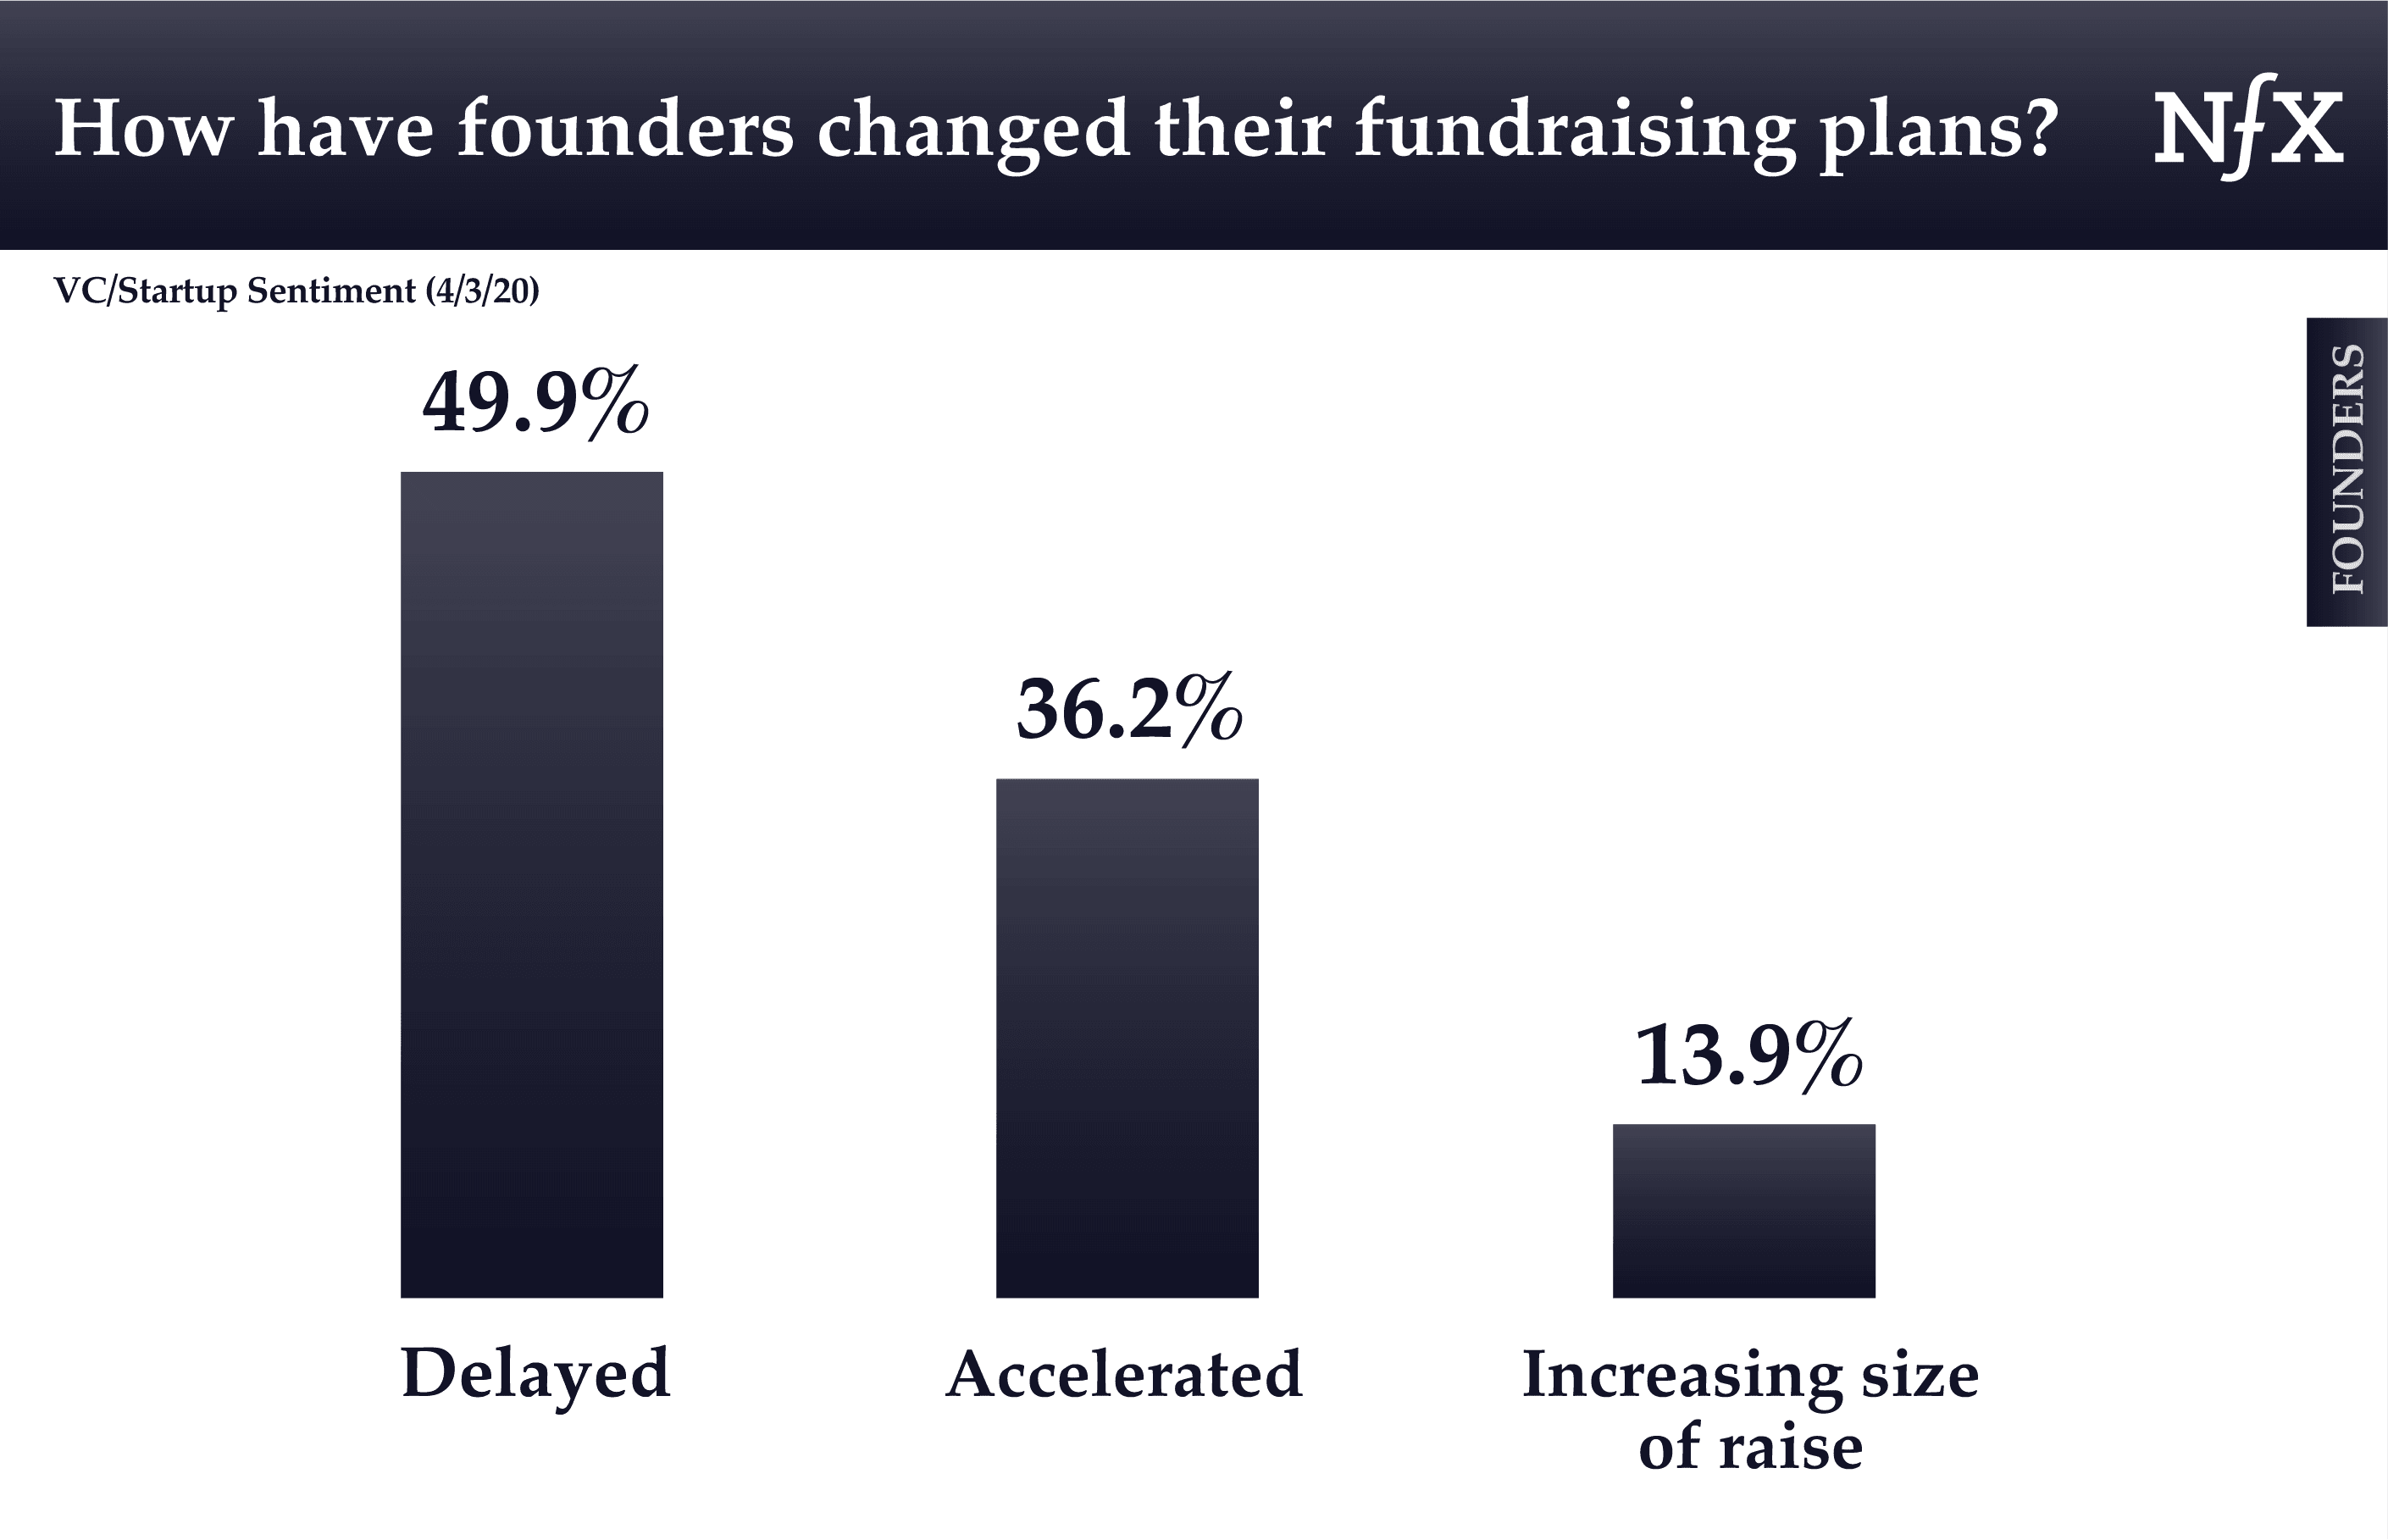 How have founders changed their fundraising during COVID-19?